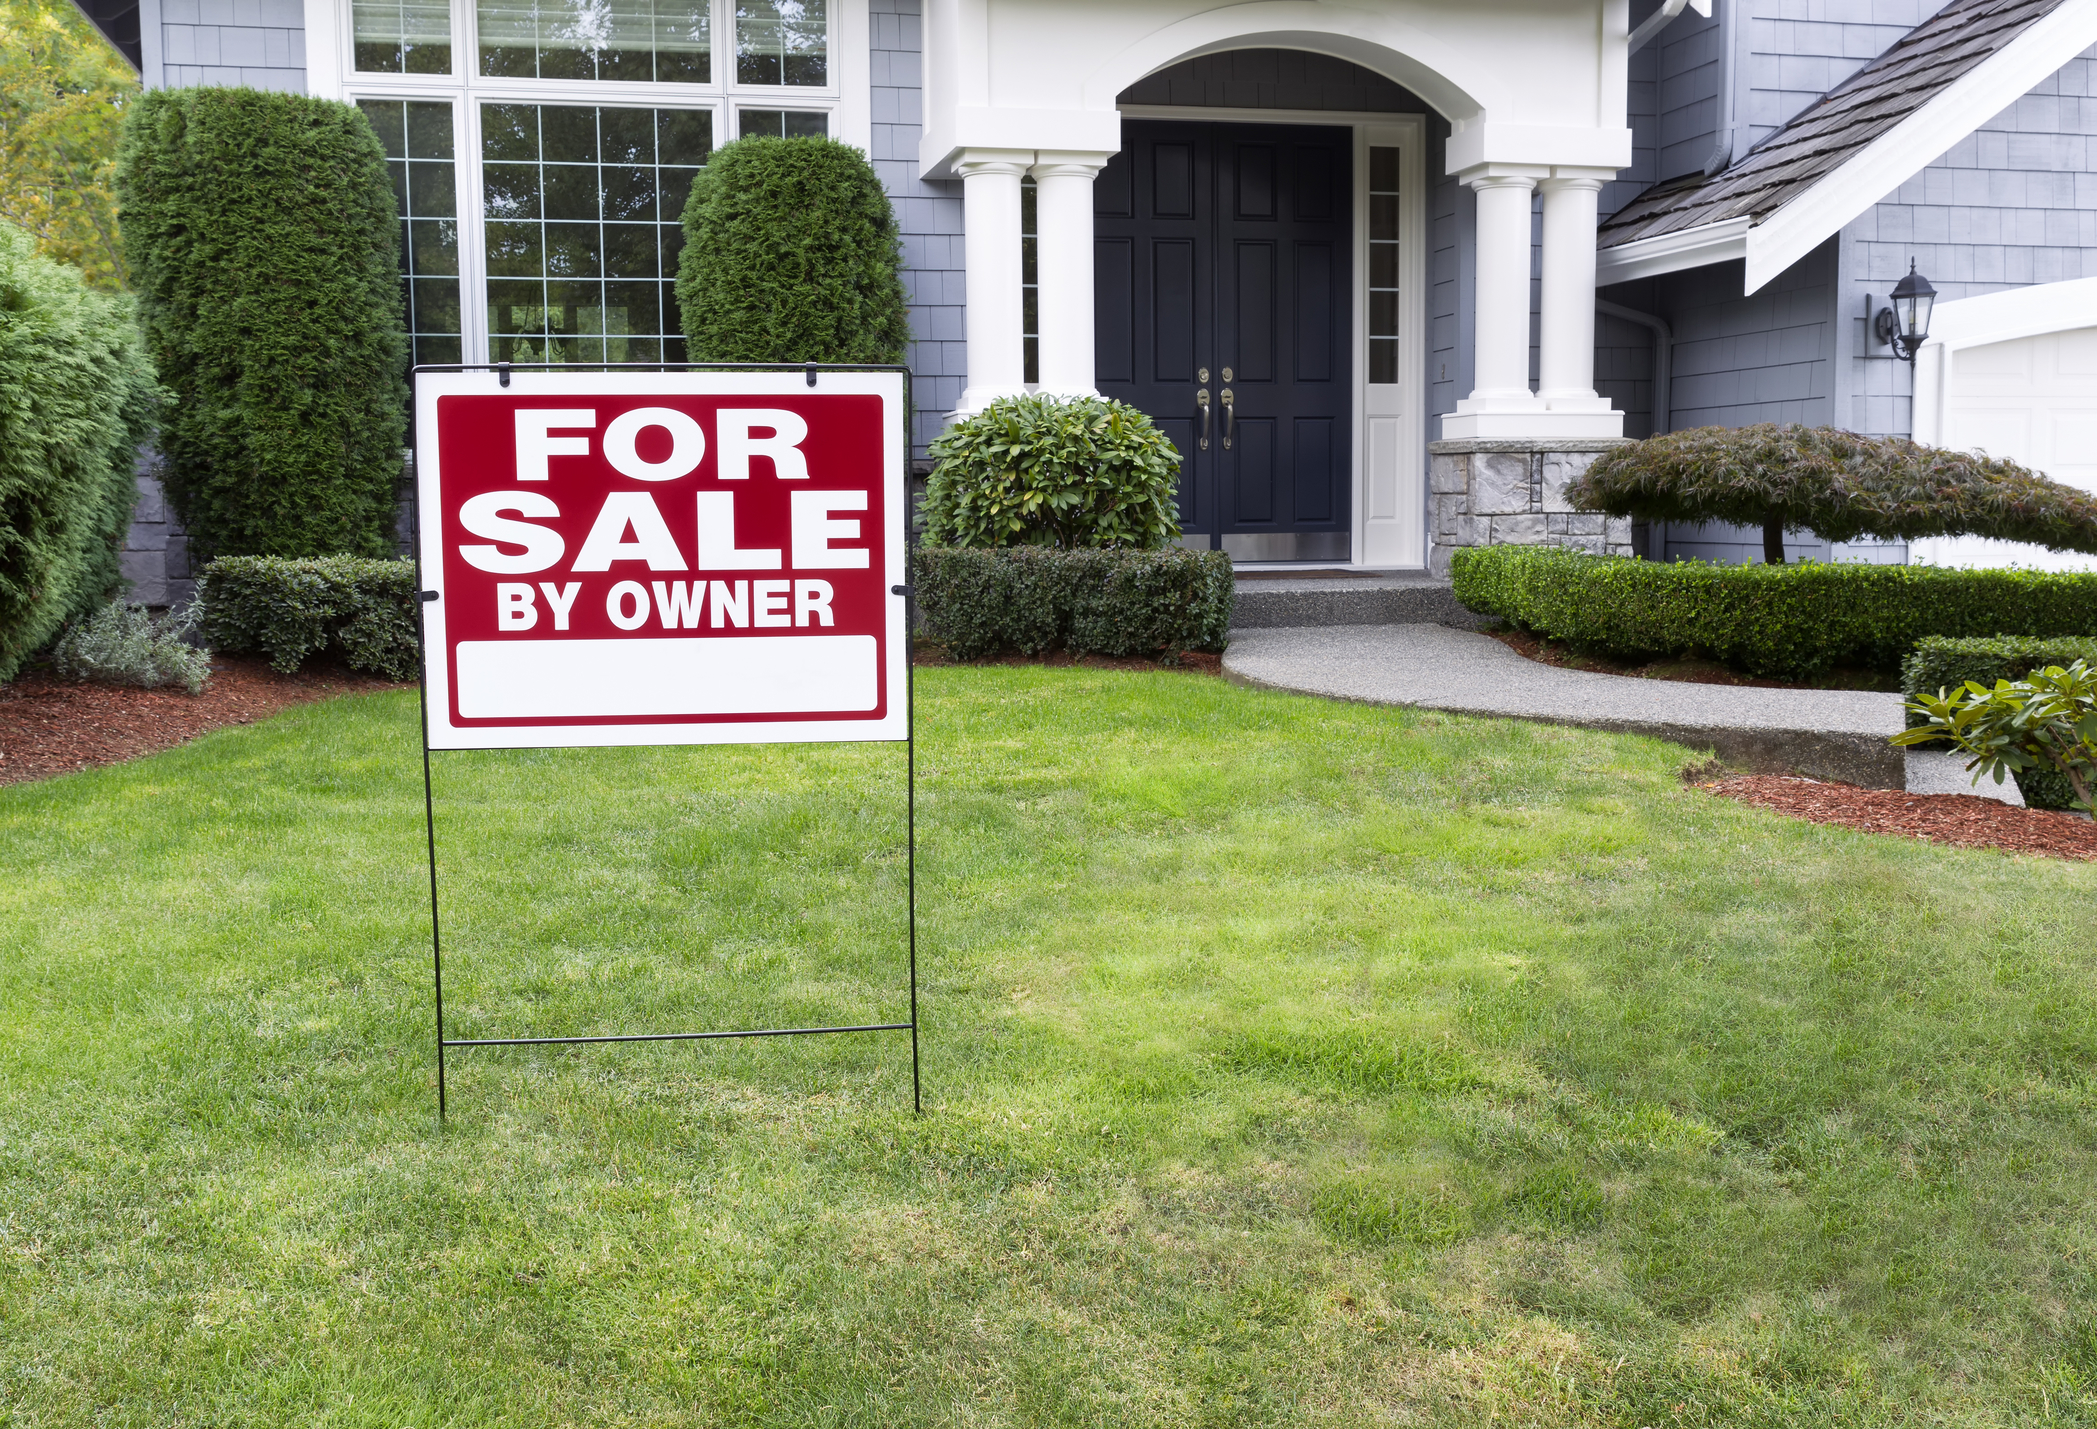 What to Expect When Selling Your Home